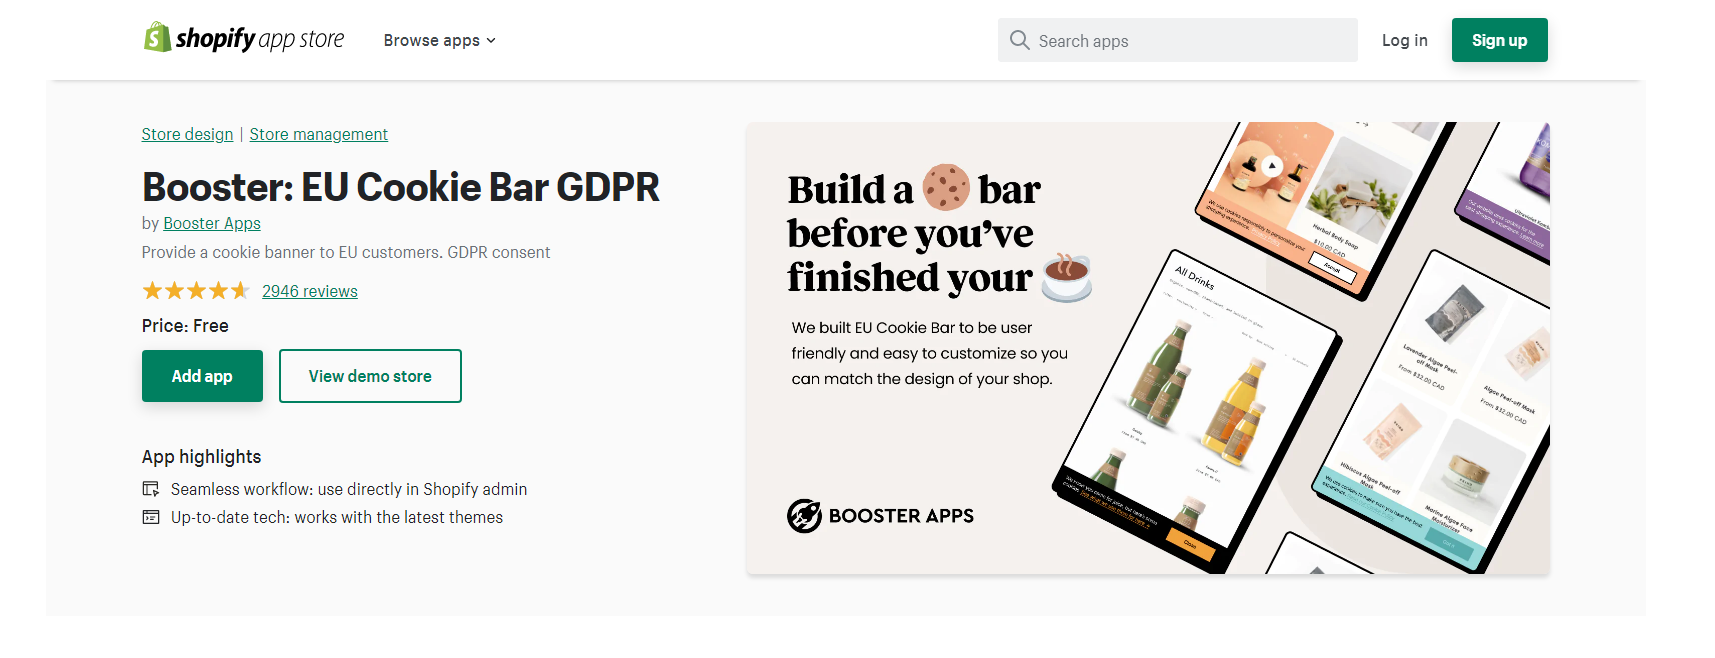 Booster EU Cookie Bar GDPR - Shopify cookie apps